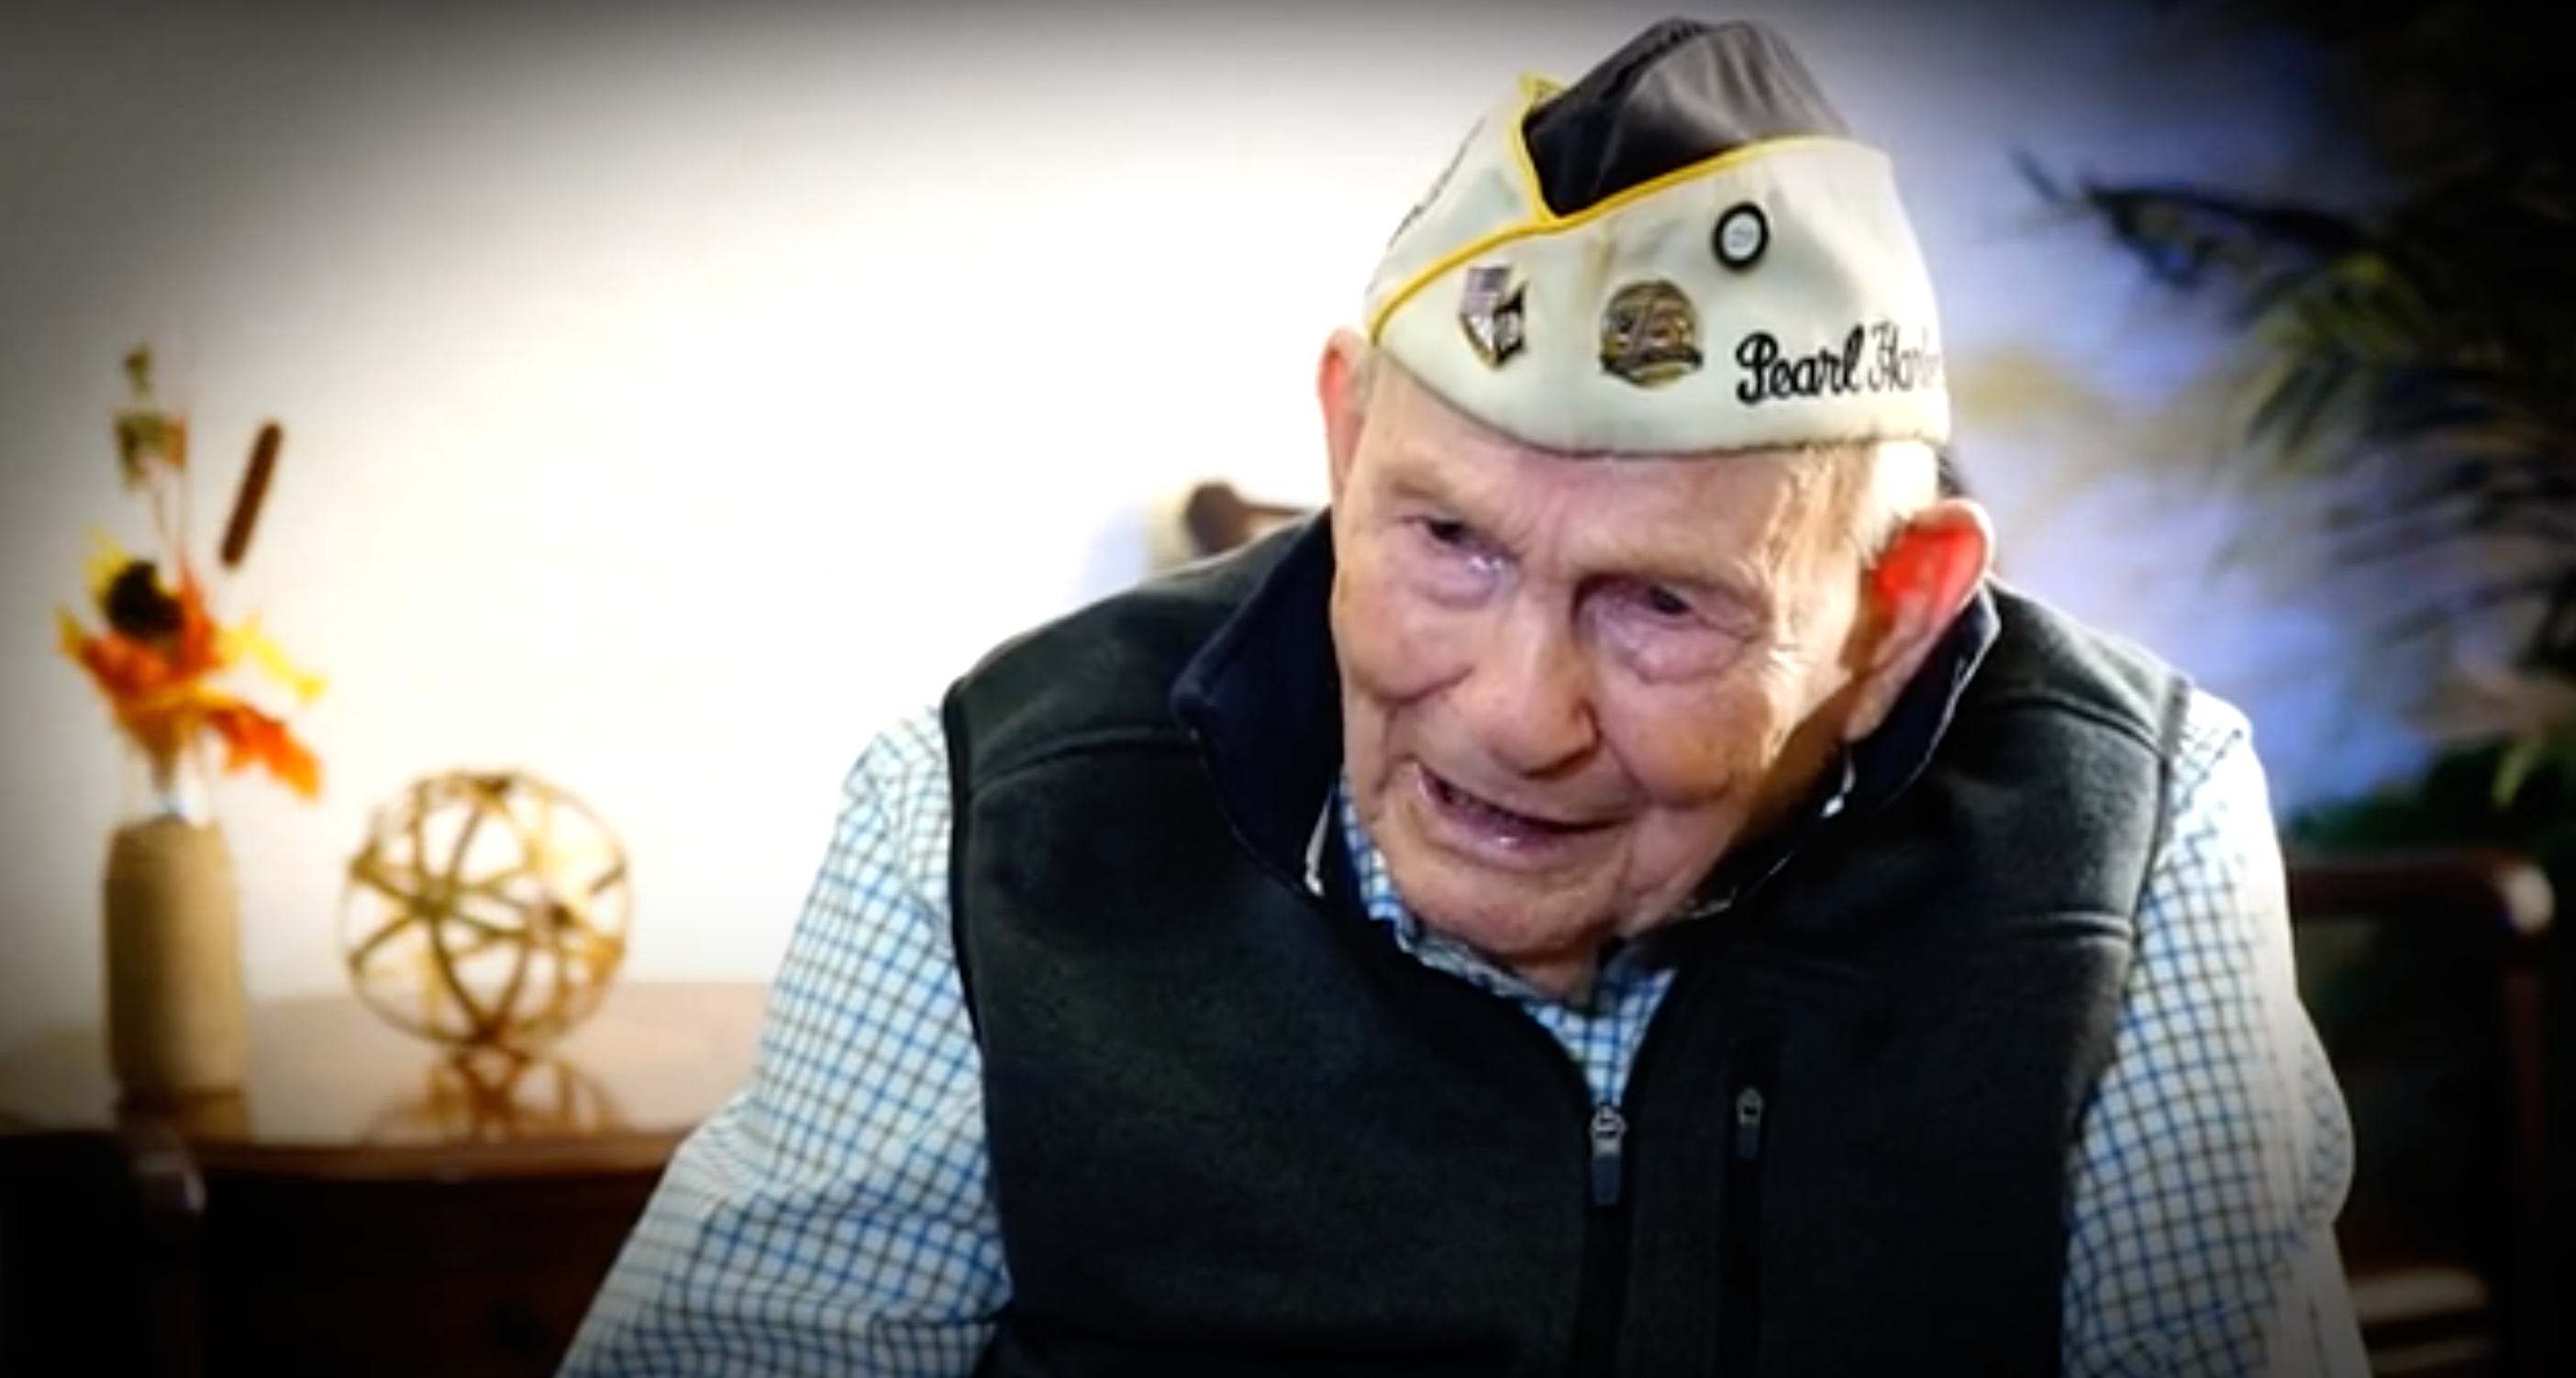 James Dewitt was aboard the USS Antares when Japanese forces attacked Pearl Harbor in 1941. 80 years later he still remembers the day clearly.